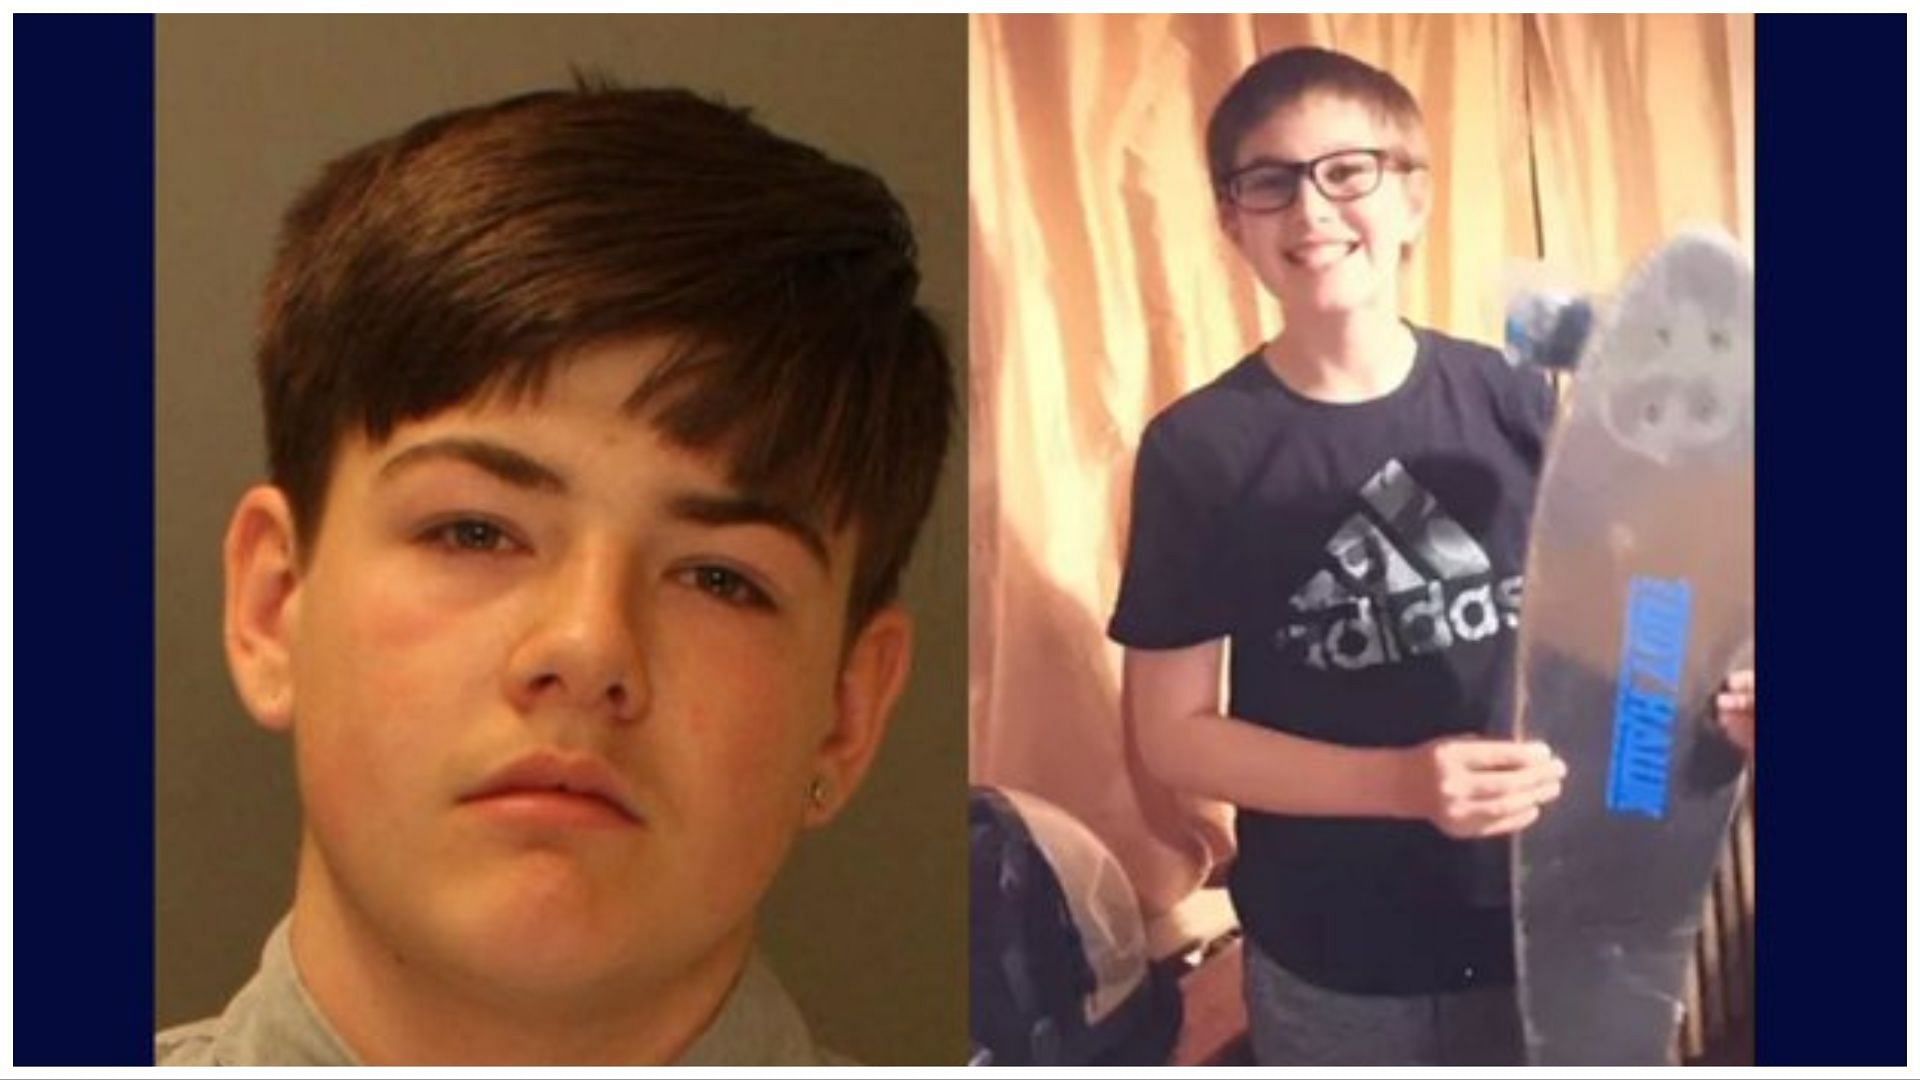 Nolan Grove (left) allegedly killed 12-year-old Kain Heiland (left), (Image via @ChasingPaper89/Twitter)